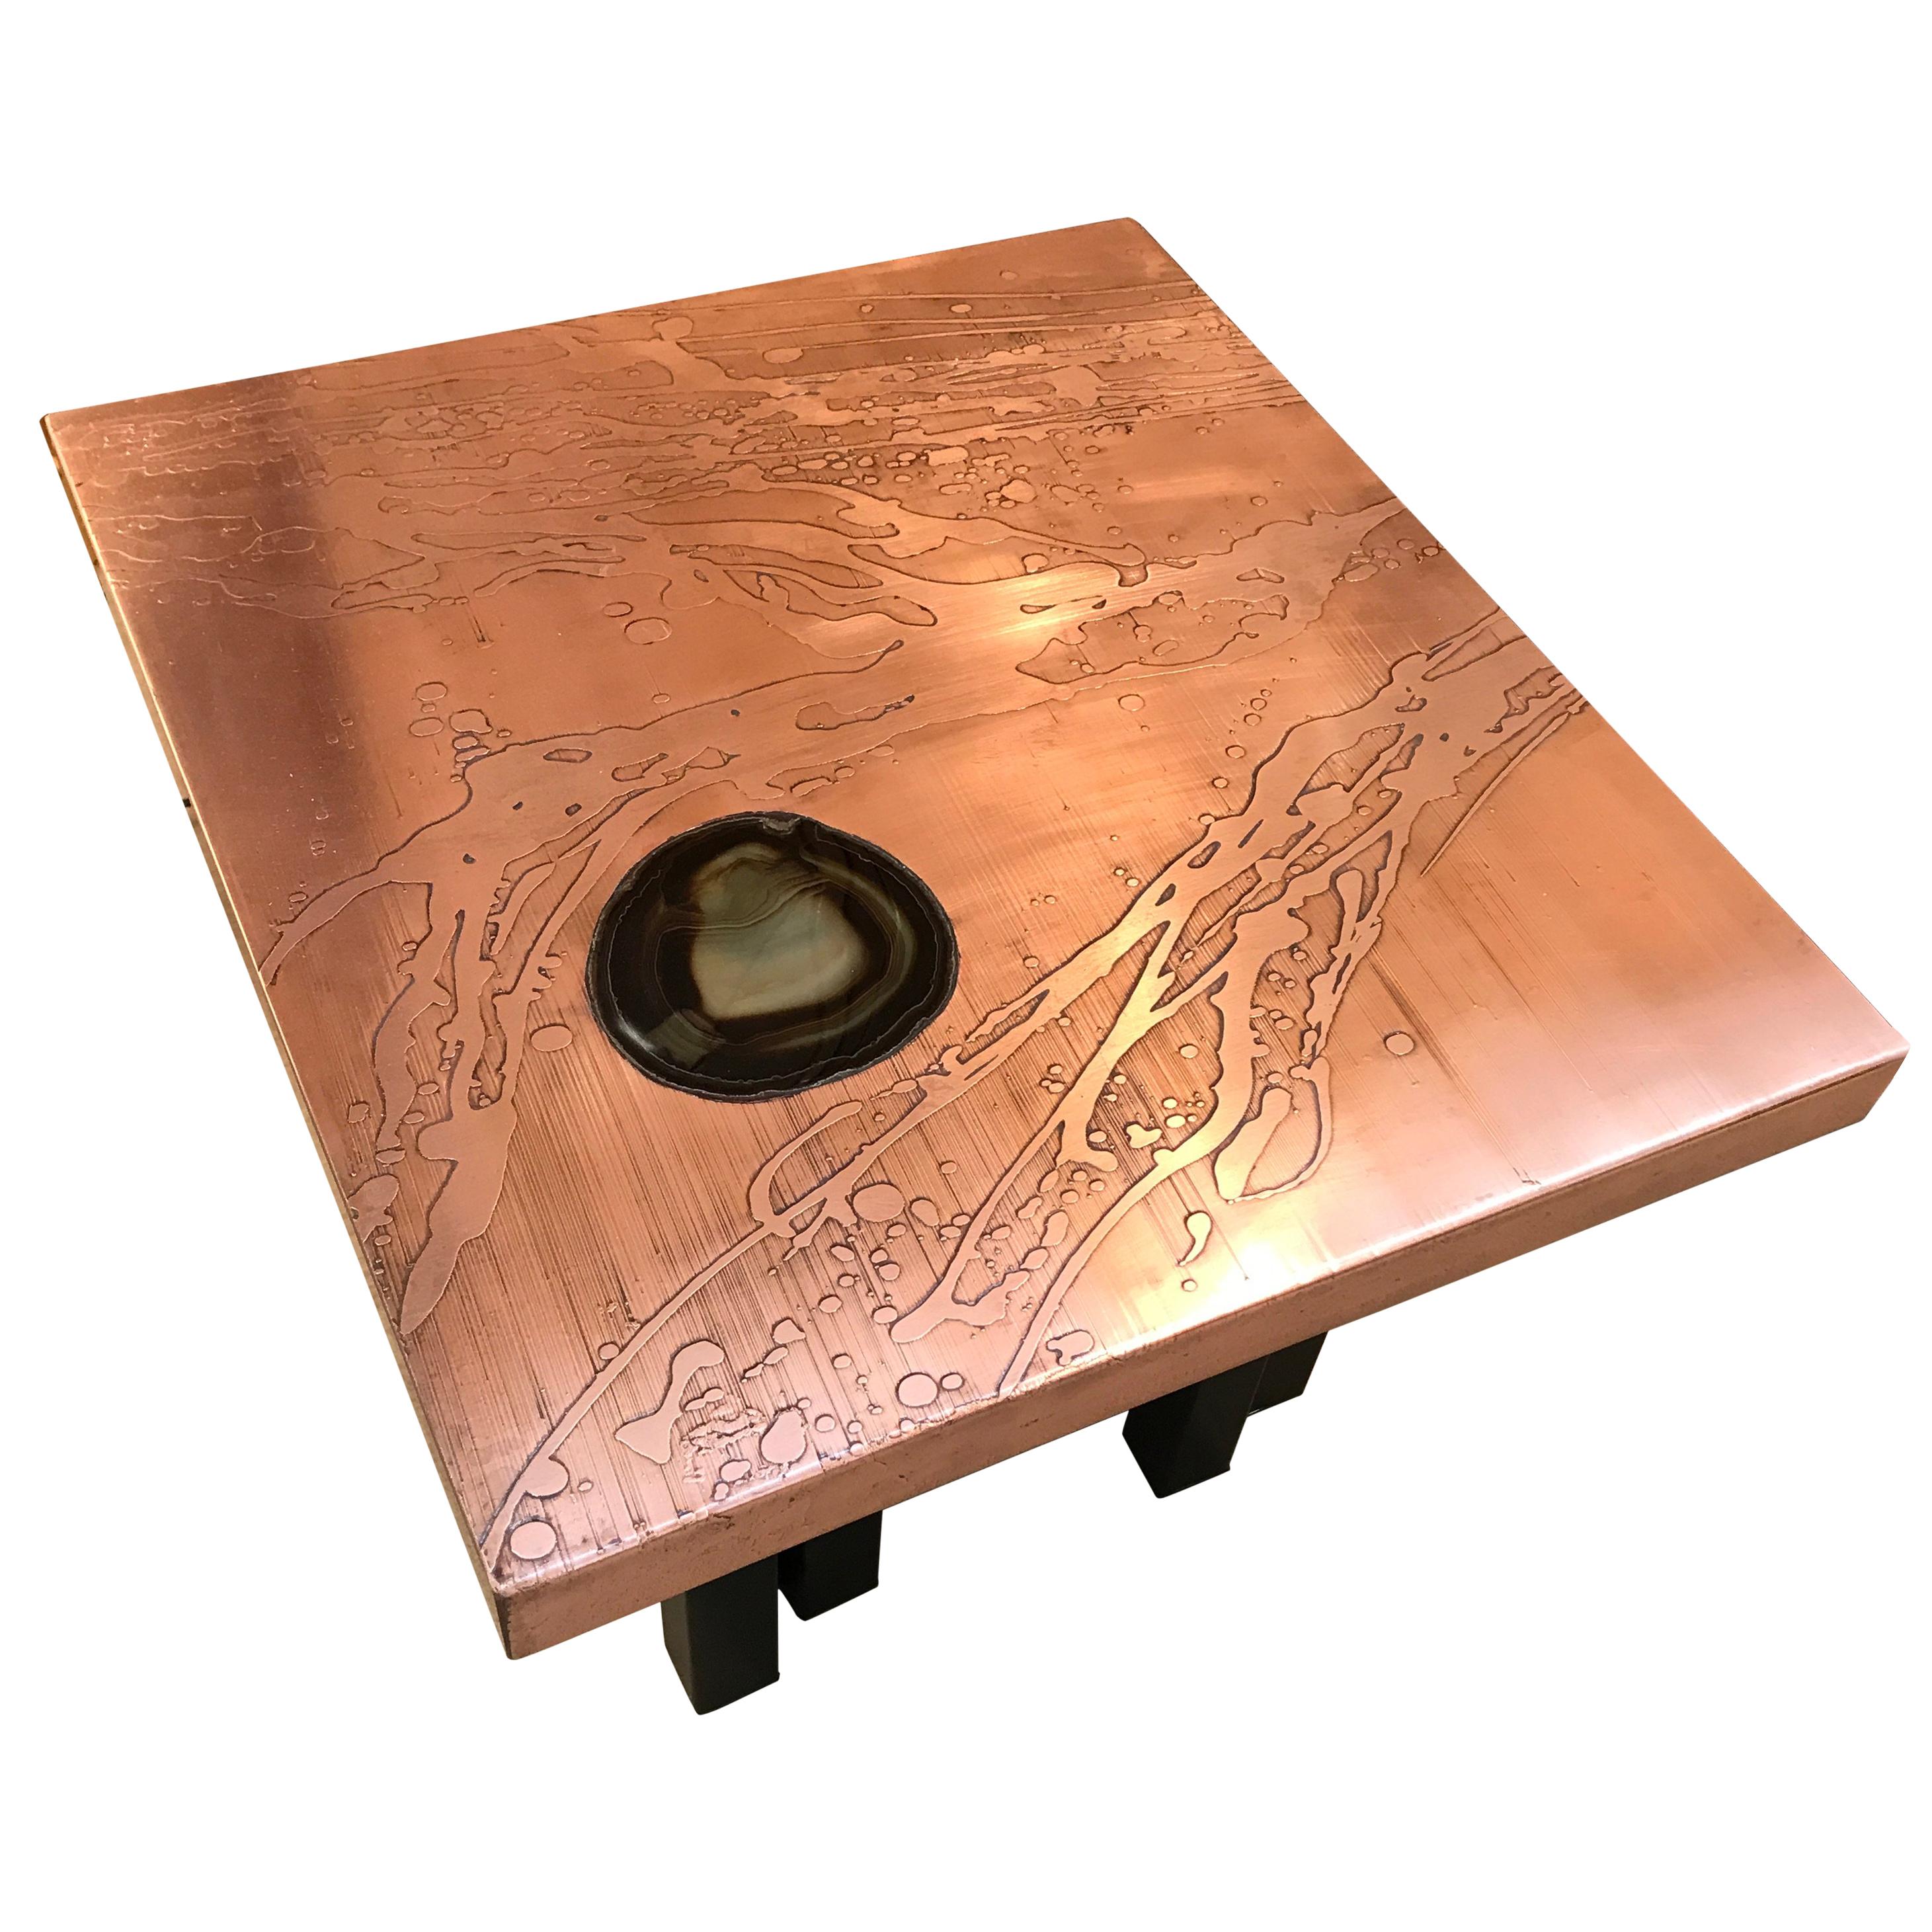 Rare Pair of Polished Acid Etched Copper End Tables by Lova Creation